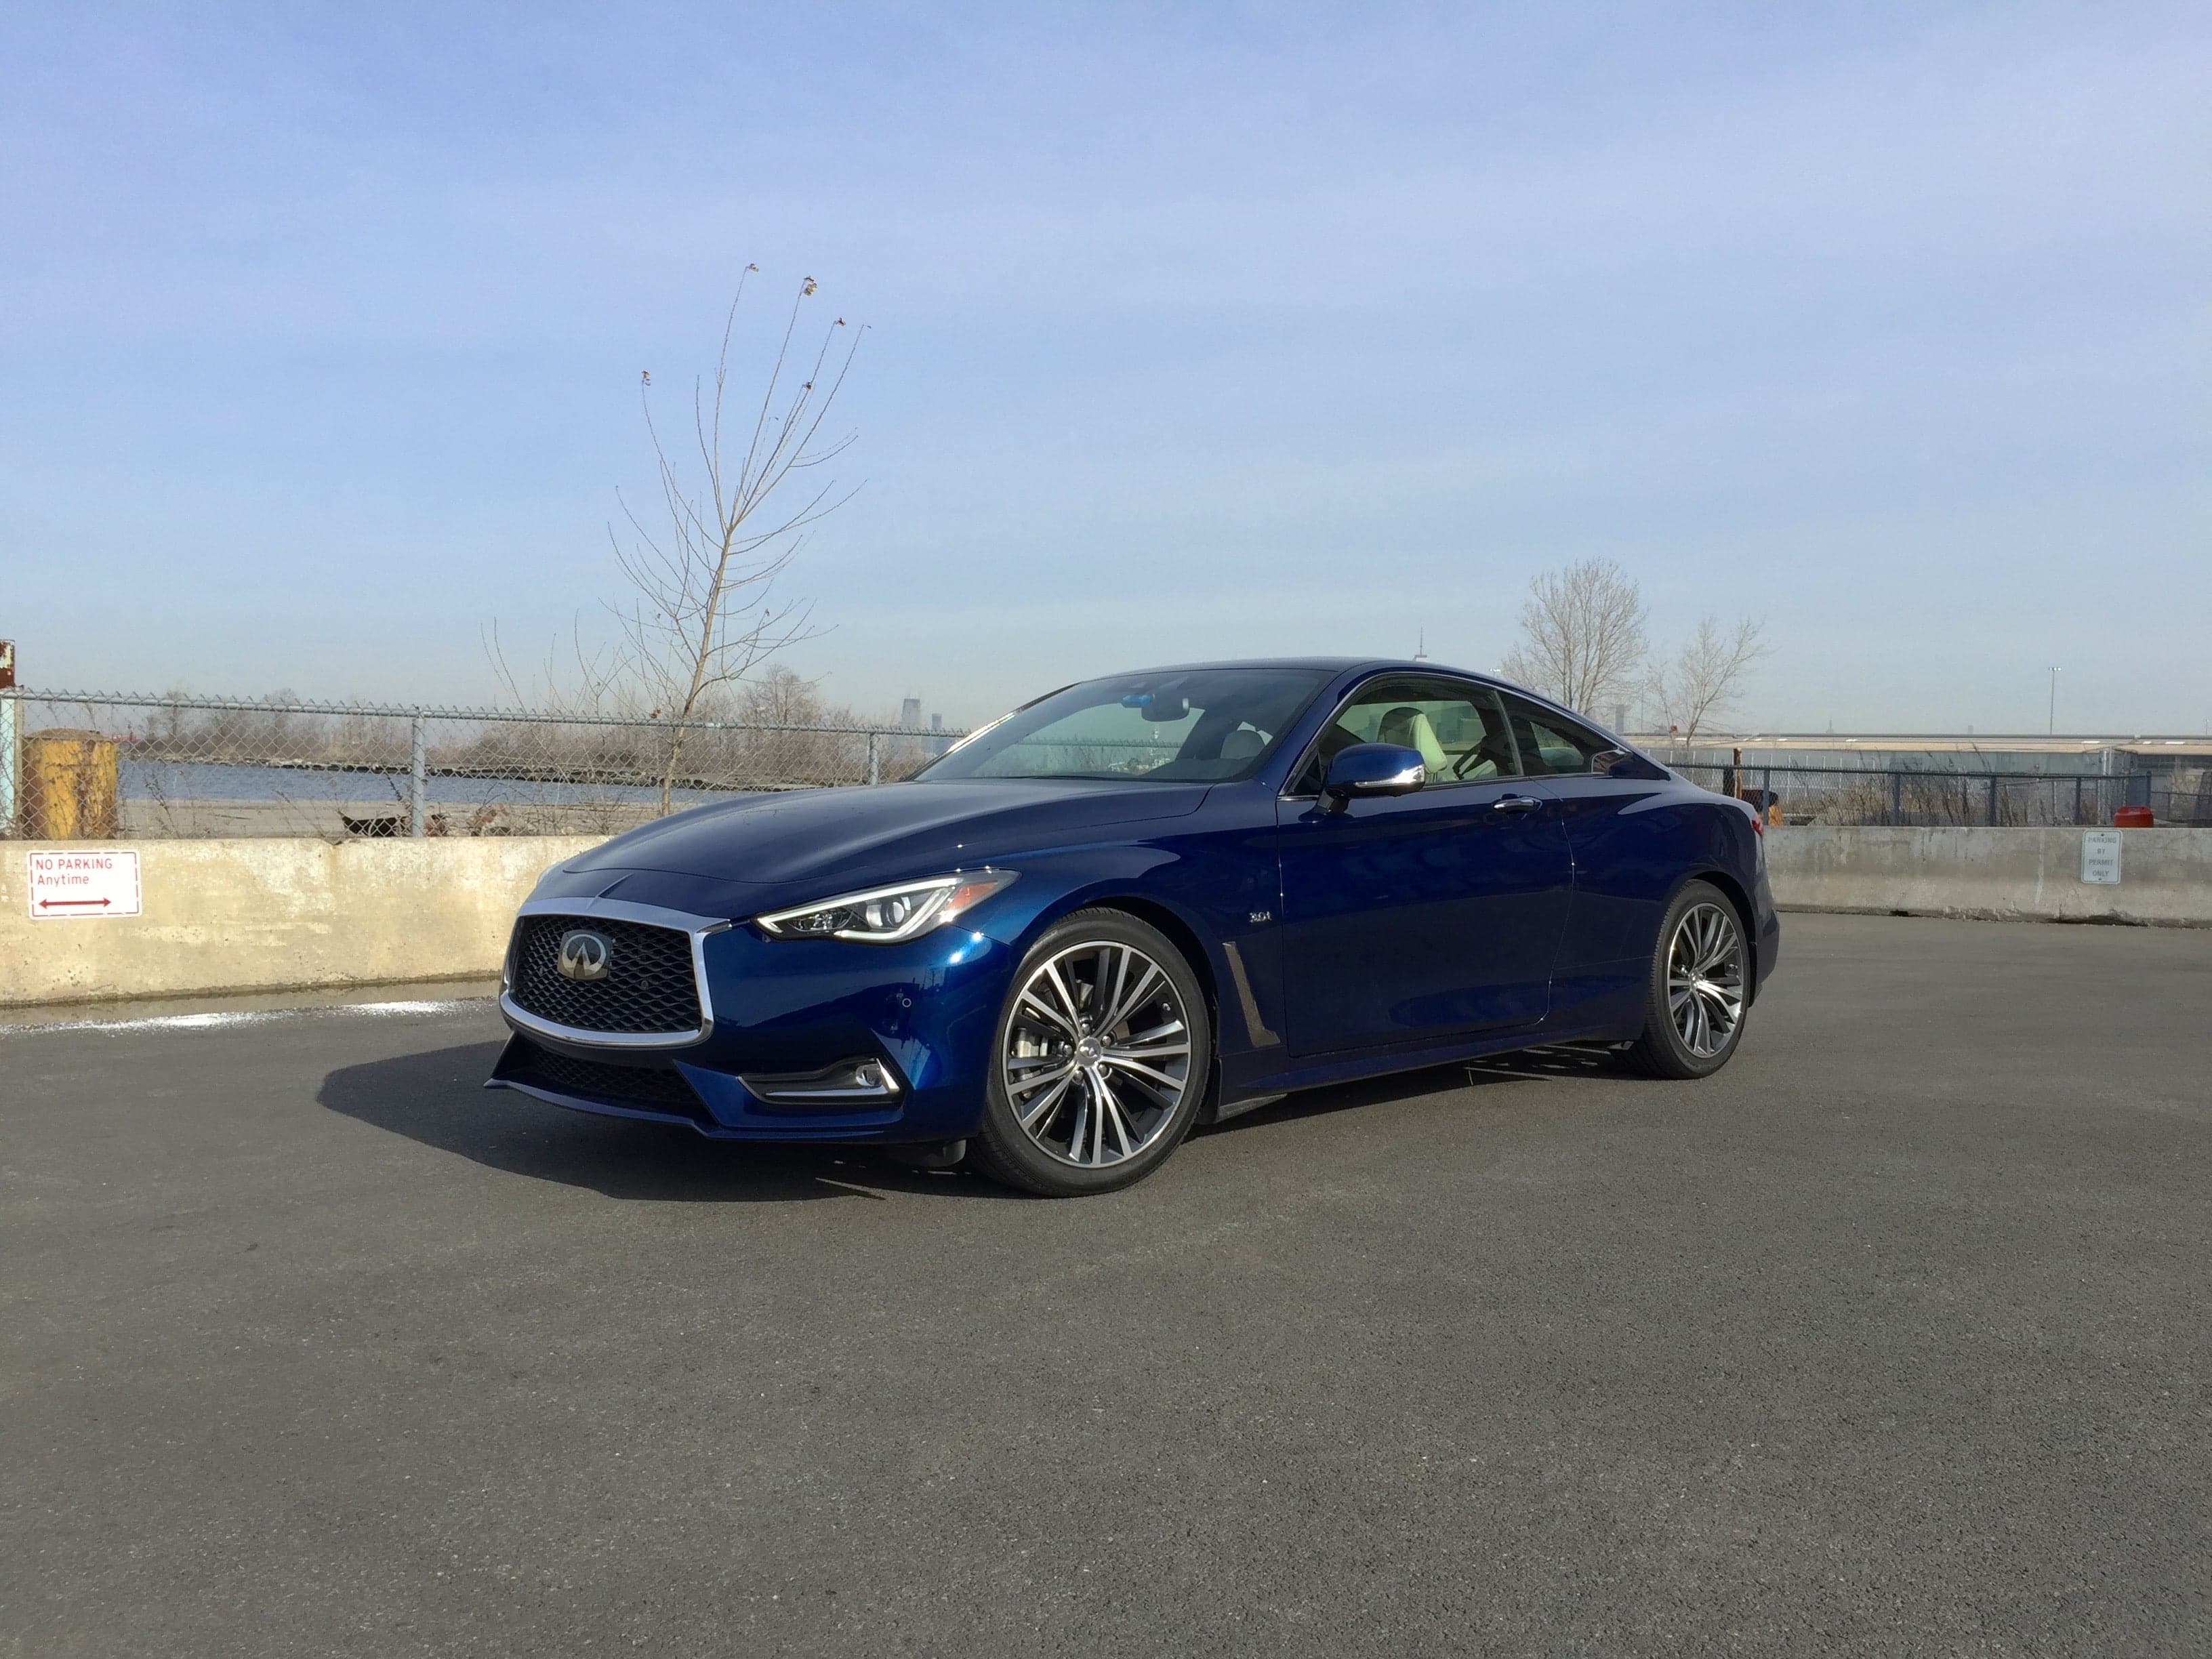 2017 Infiniti Q60 3.0t Premium Blends Surprising Performance with Comfort and Styling